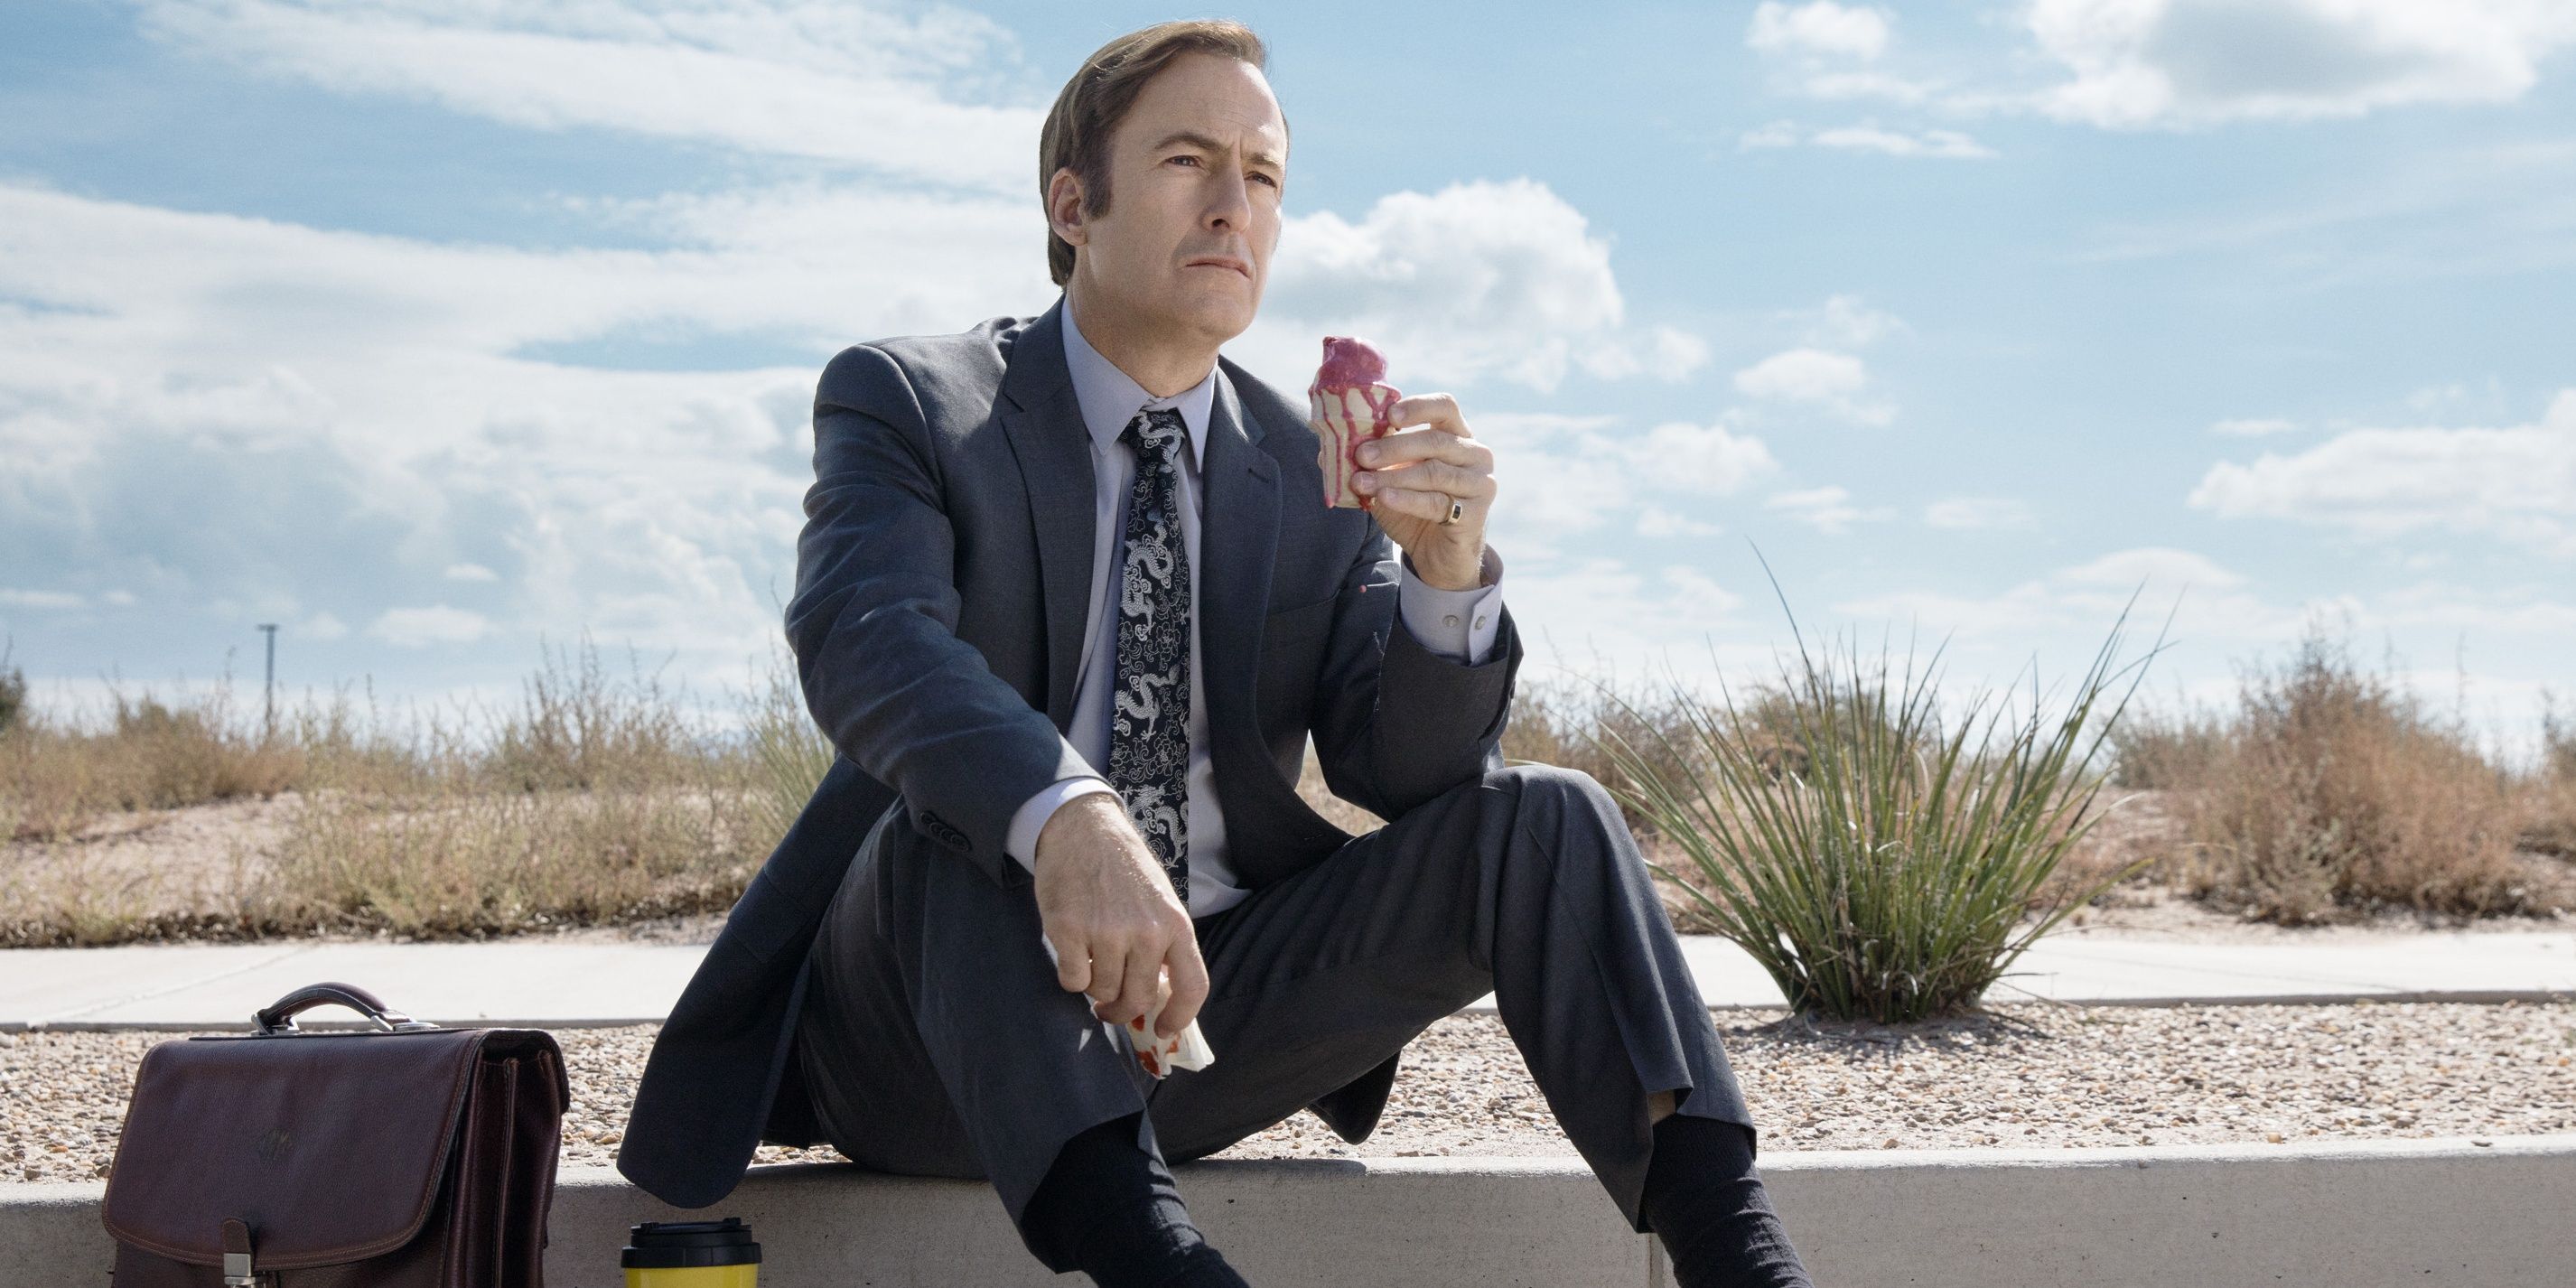 Better Call Saul 10 Unanswered Questions From Breaking Bad That The SpinOff Answers